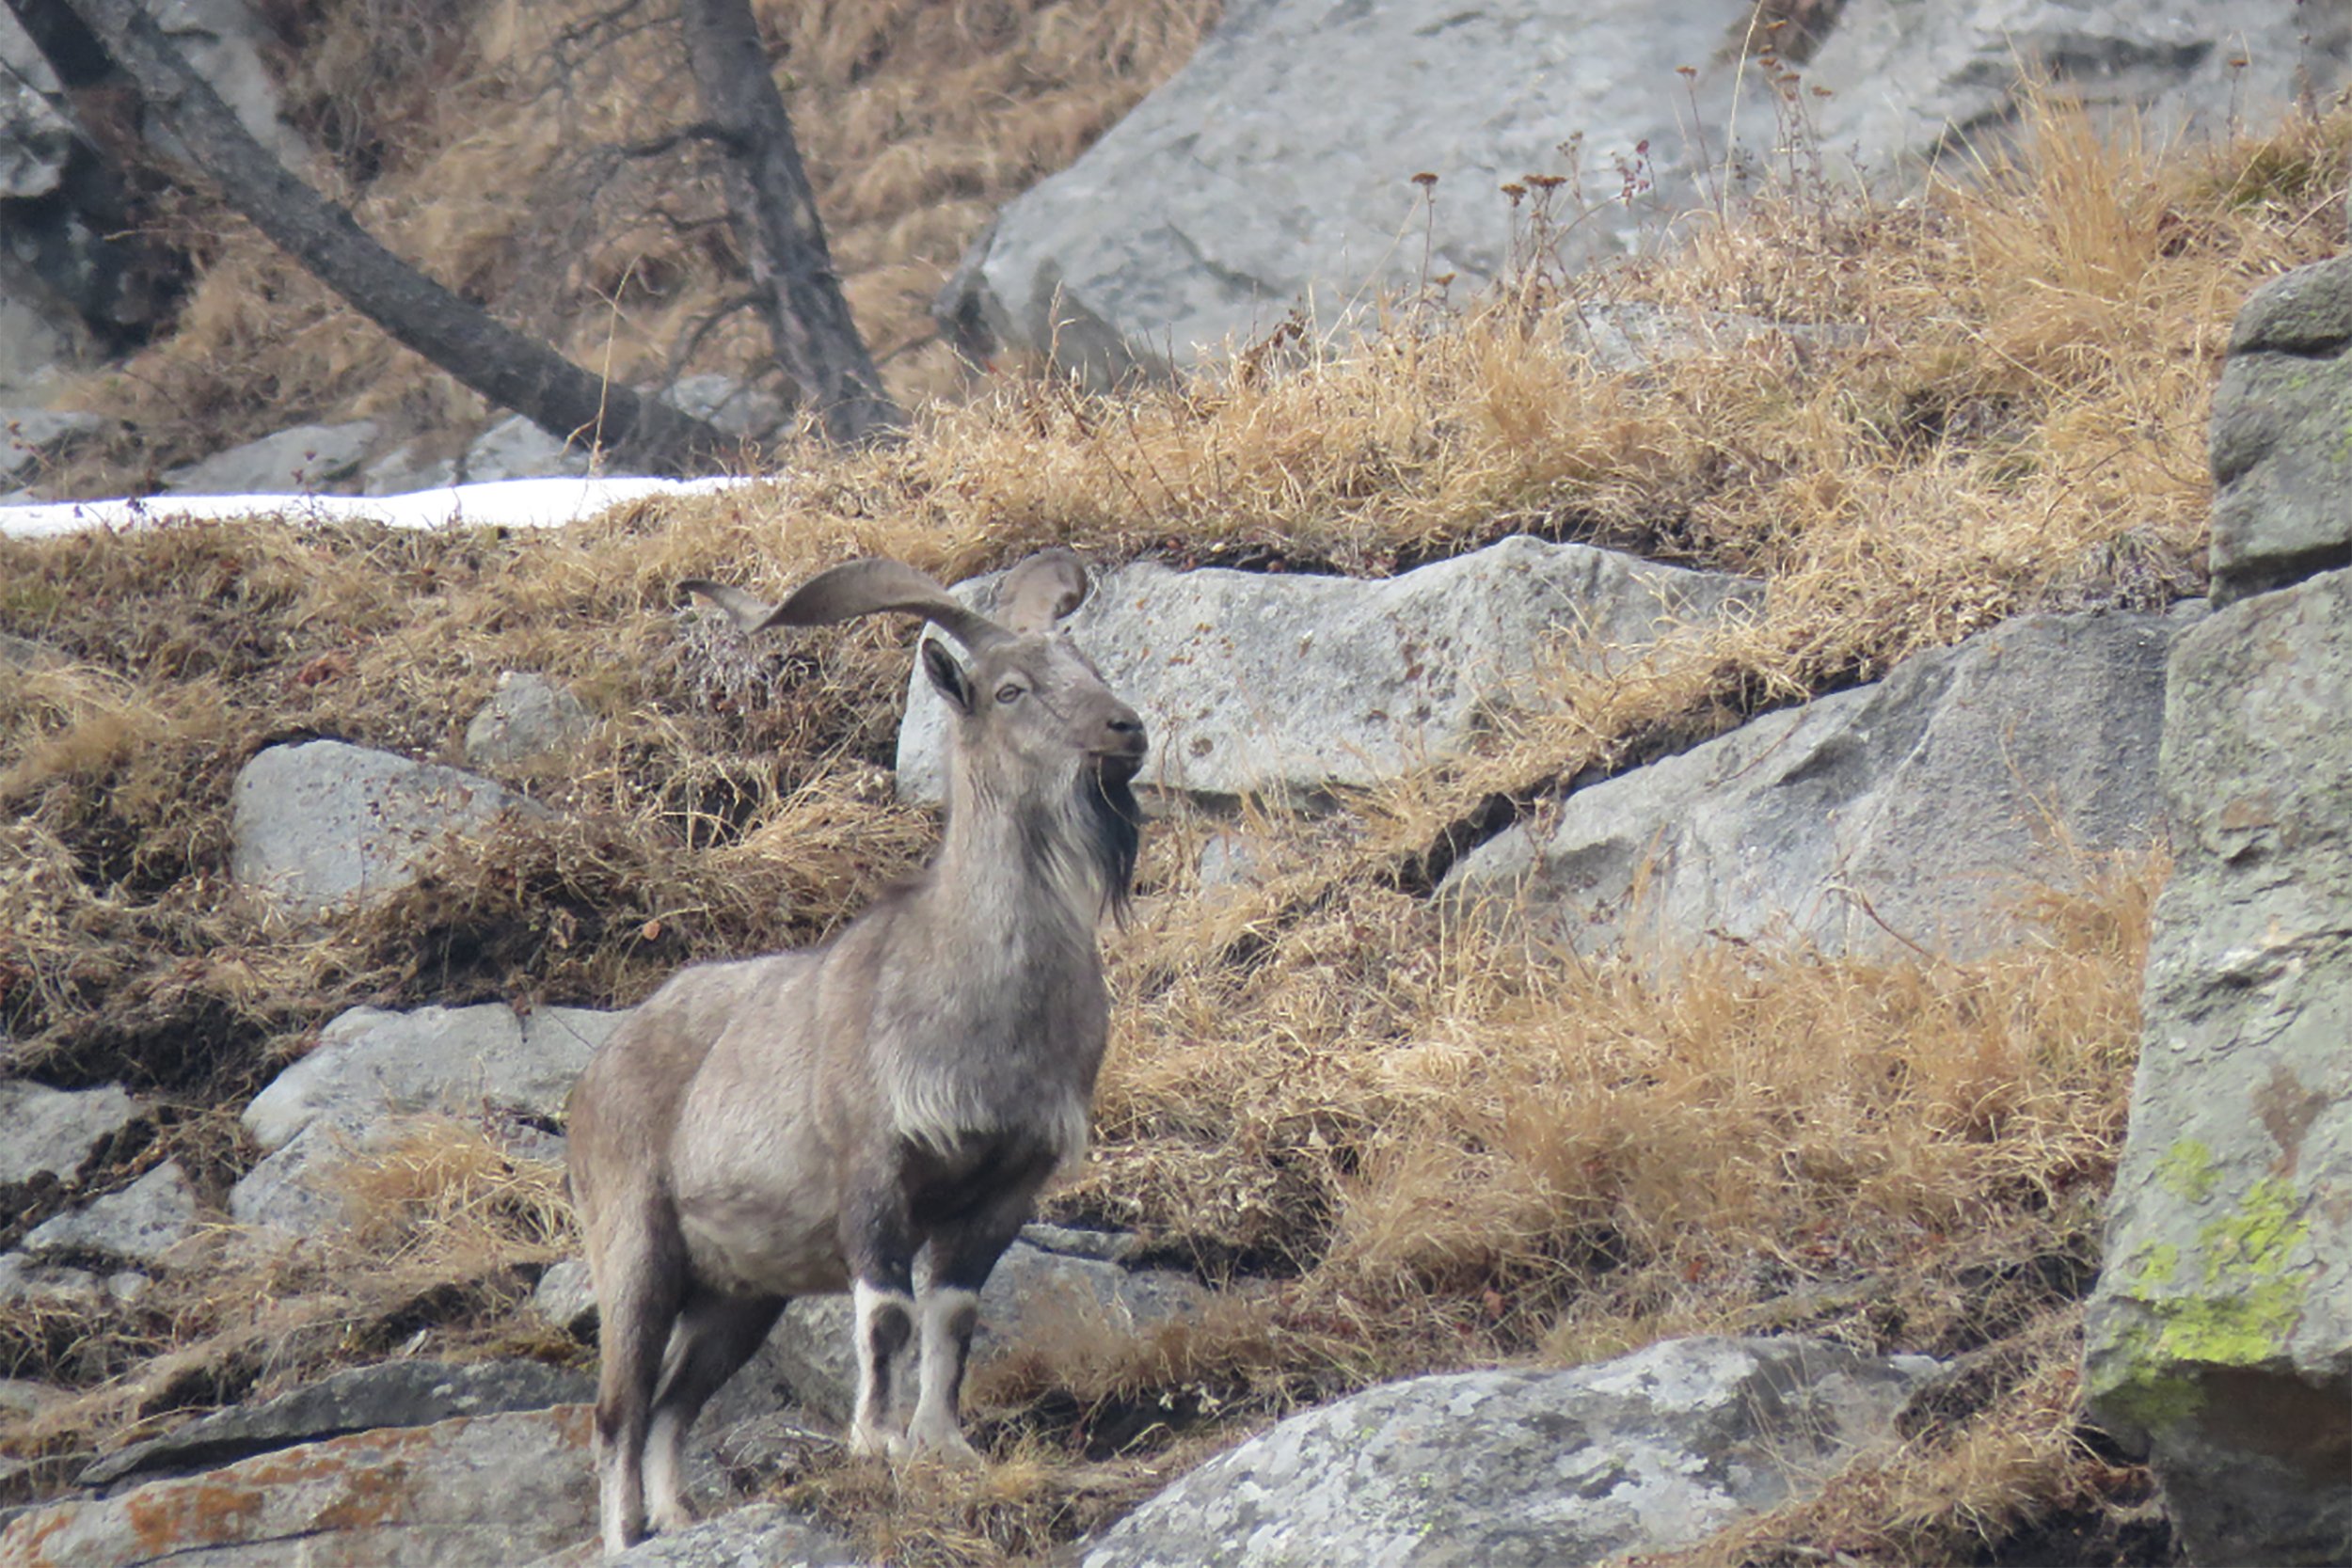 A Markhor in the wild [image courtesy: Wildlife Trust of India]